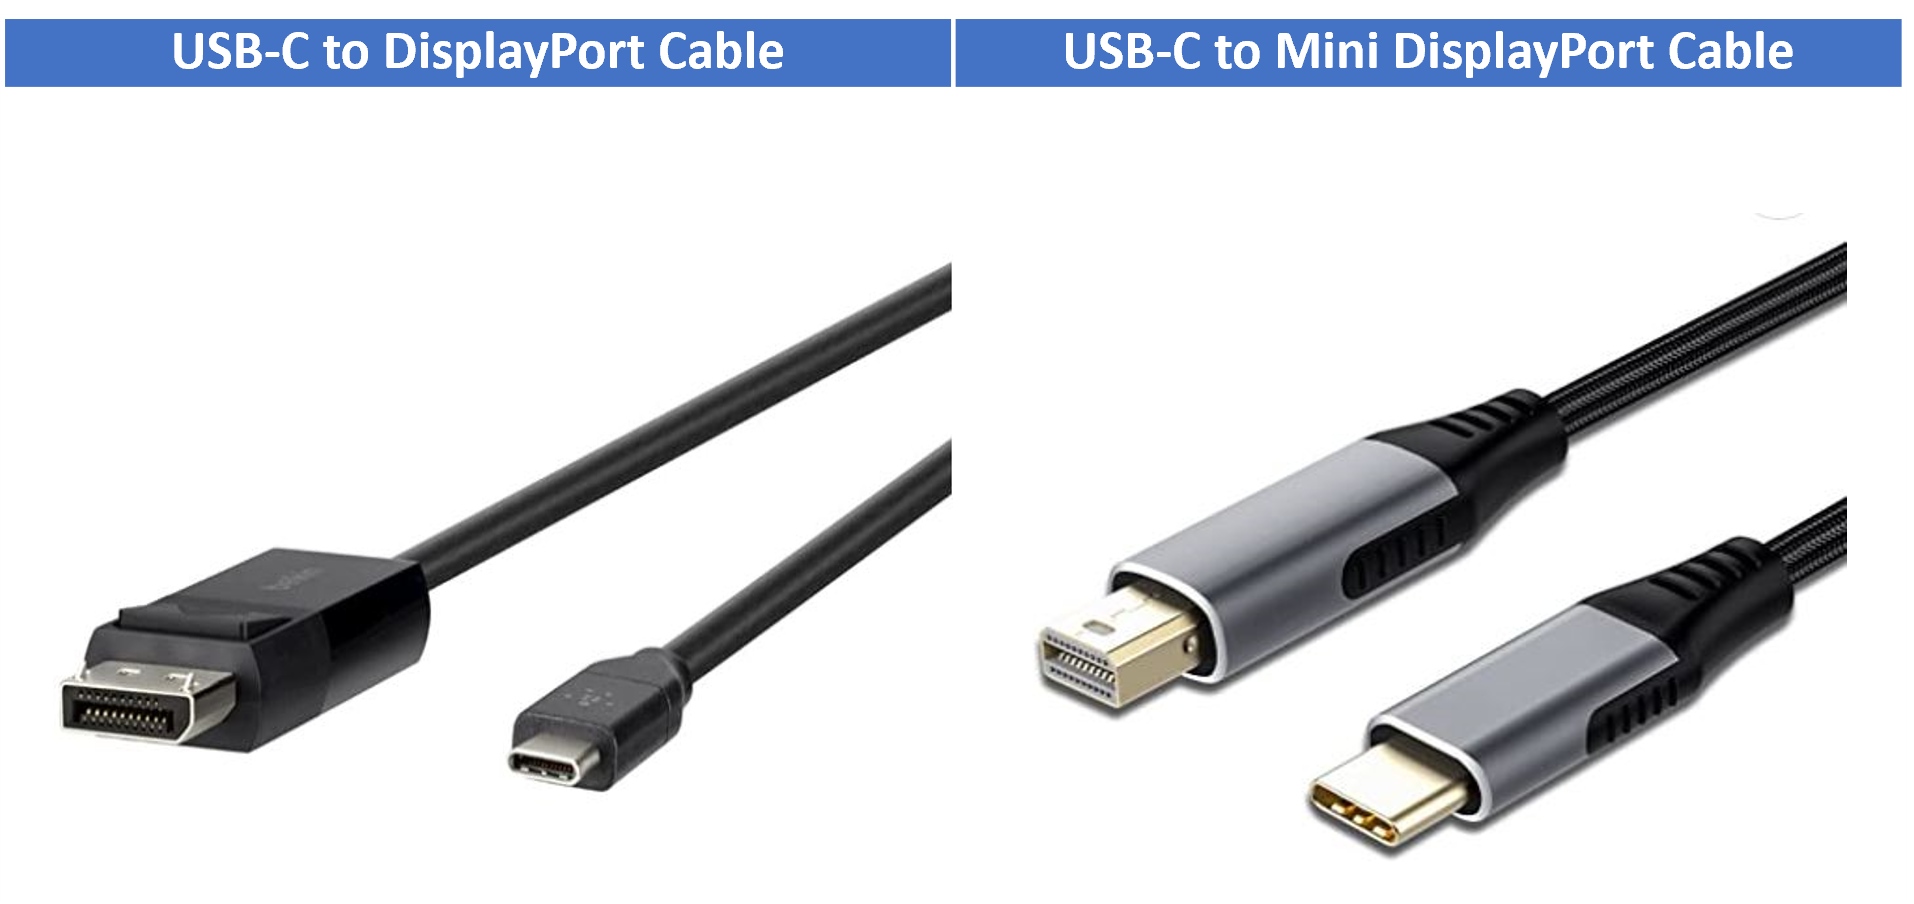 USB-C vs HDMI; Which is better for Gaming or Video quality?